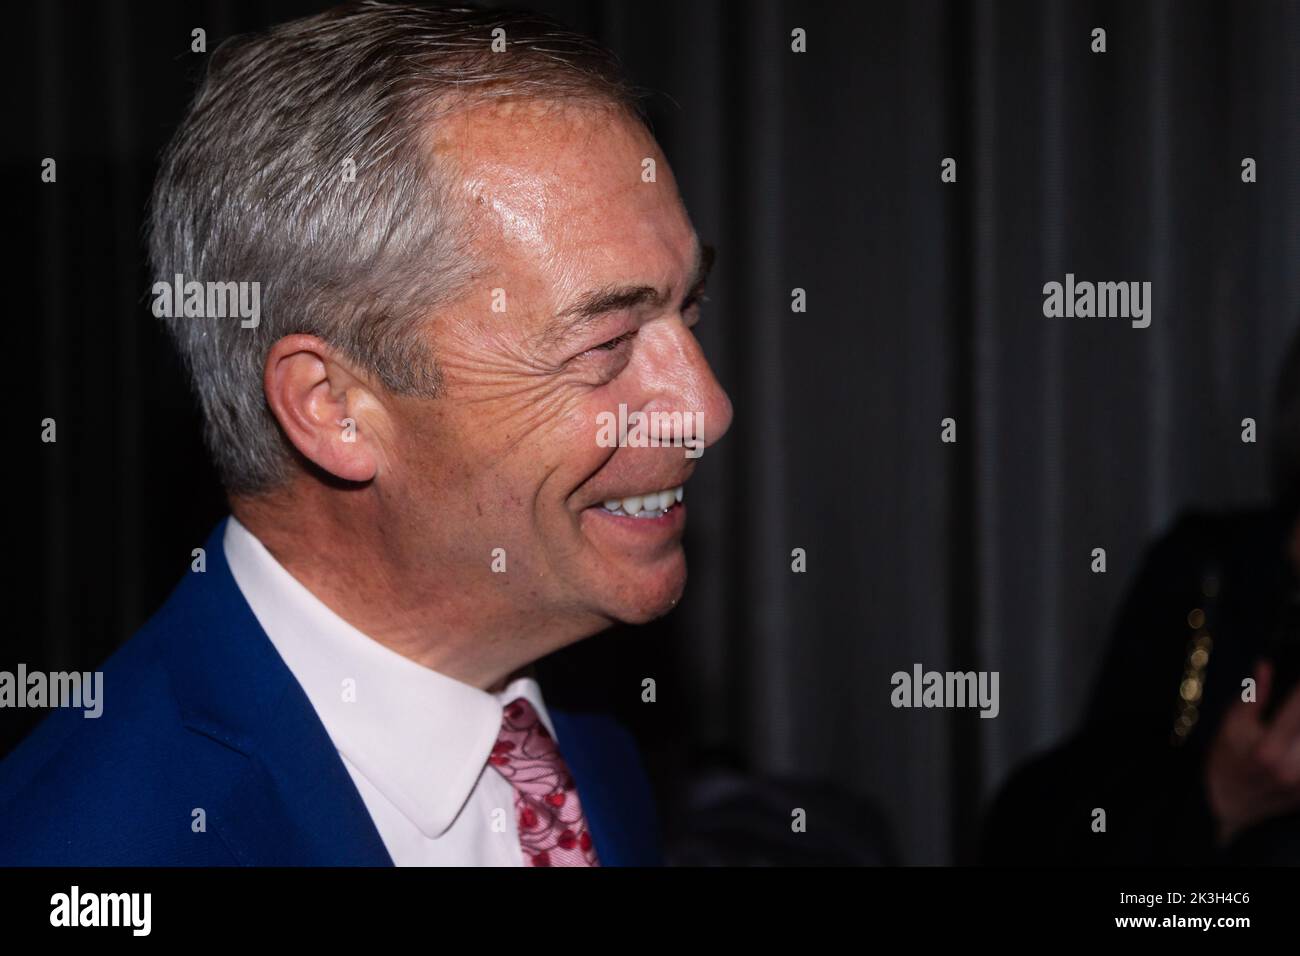 Melbourne, Australia, 26 September, 2022. Nigel Farage is seen laughing with a guest during An Evening With Nigel Farage at The Melbourne Convention and Exhibition Centre on September 26, 2022 in Melbourne, Australia. Credit: Dave Hewison/Speed Media/Alamy Live News Stock Photo